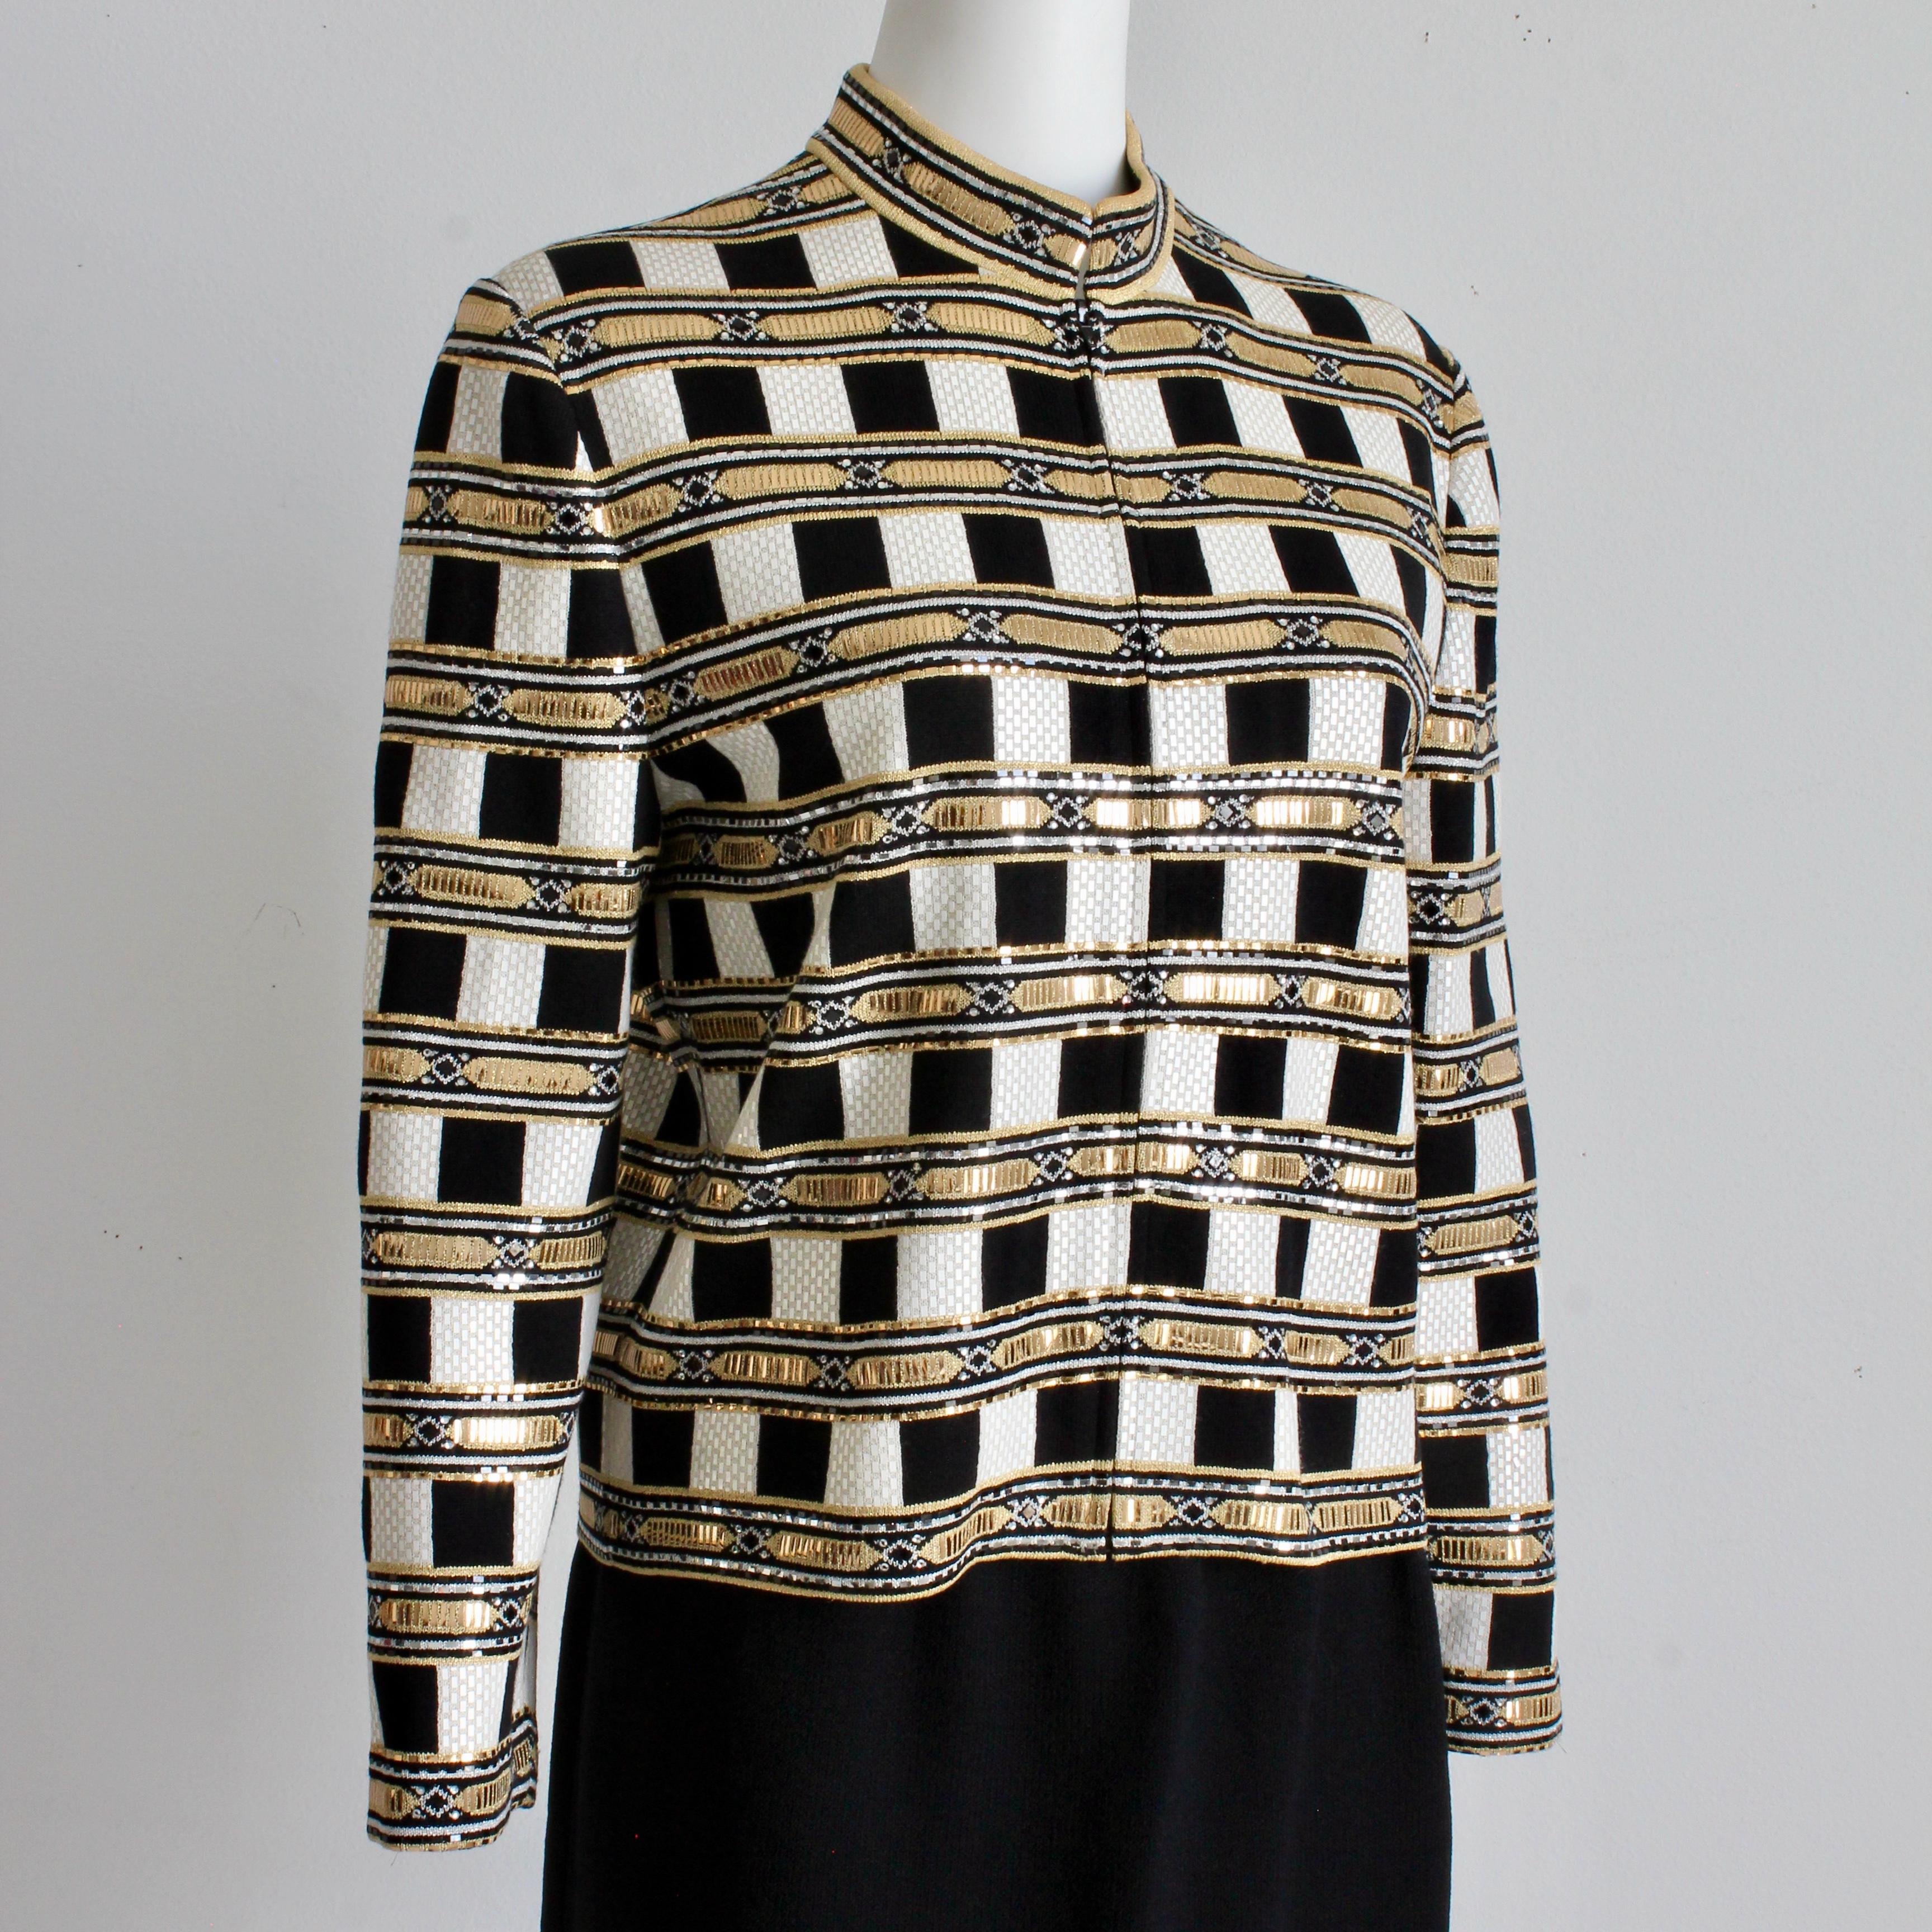 Authentic, preowned, vintage St John Evening Jacket, likely made in the 90s. Made from their signature Santana knit in black, this box-cut jacket is embellished throughout with gold and white paillettes, so chic! Zipper front/unlined/wool blend/dry